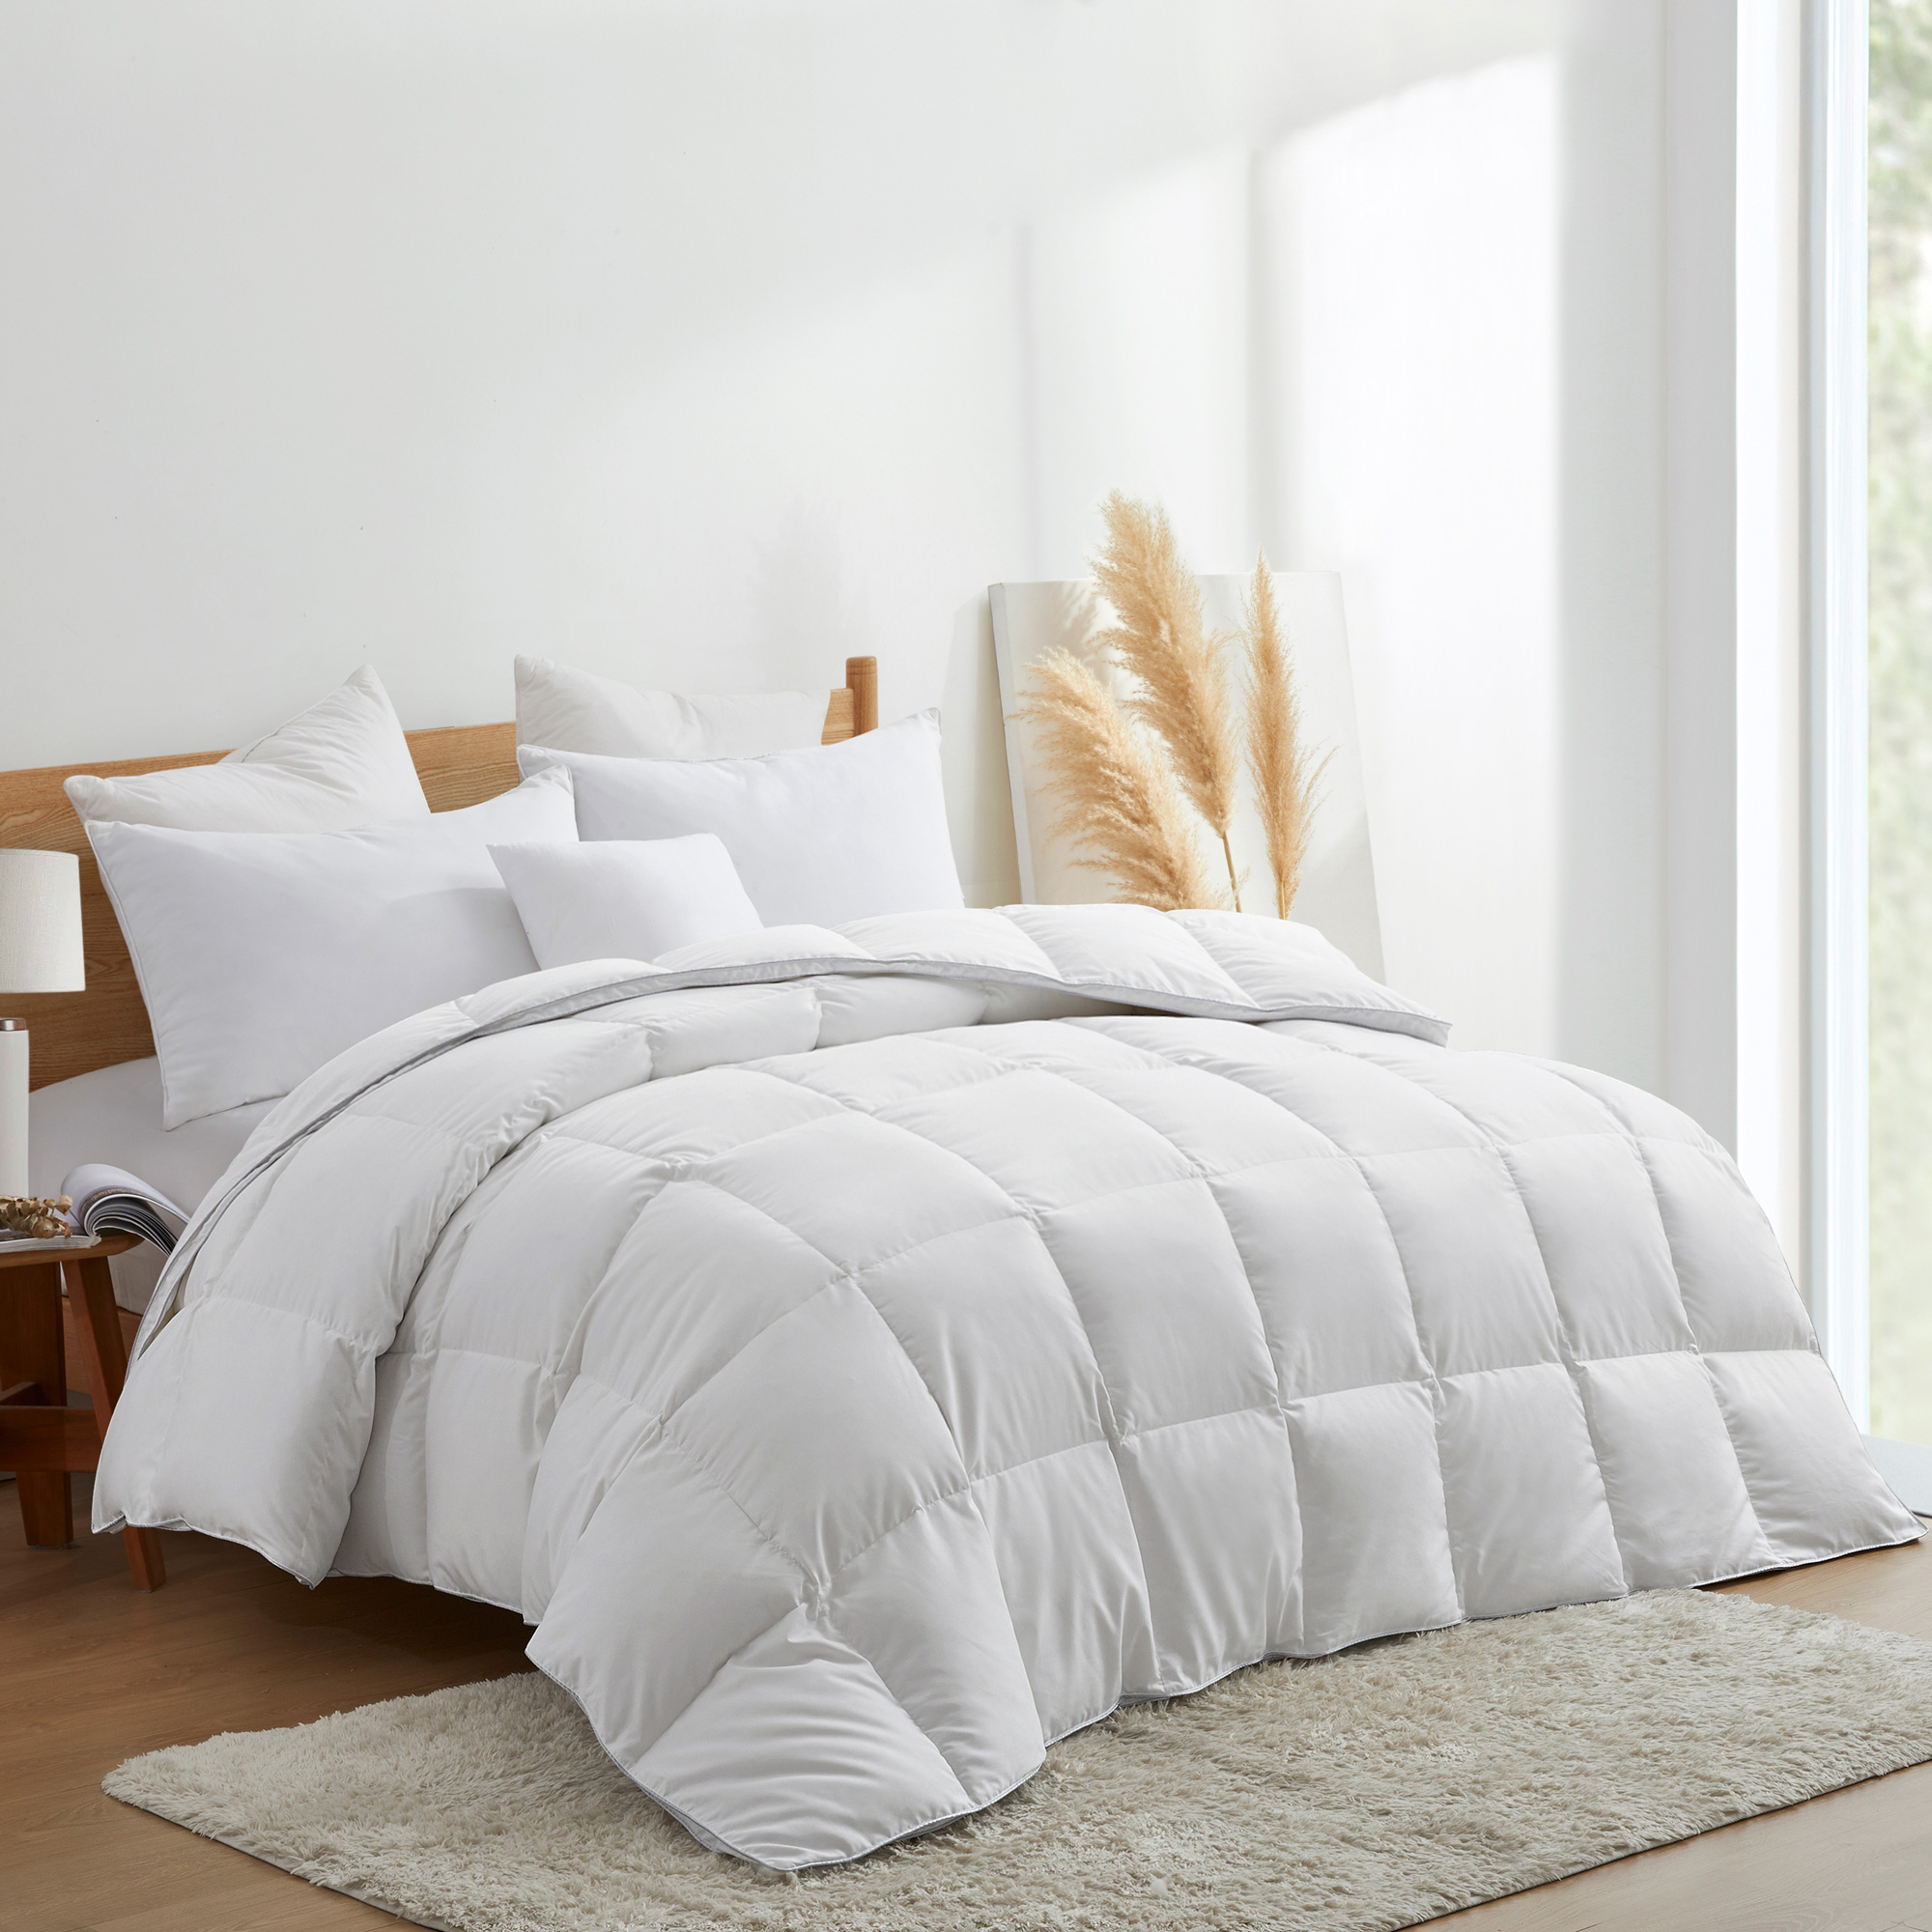 Luxurious Medium Weight White Goose Down Feathers Fiber Comforter, For All-Season Weather - California King